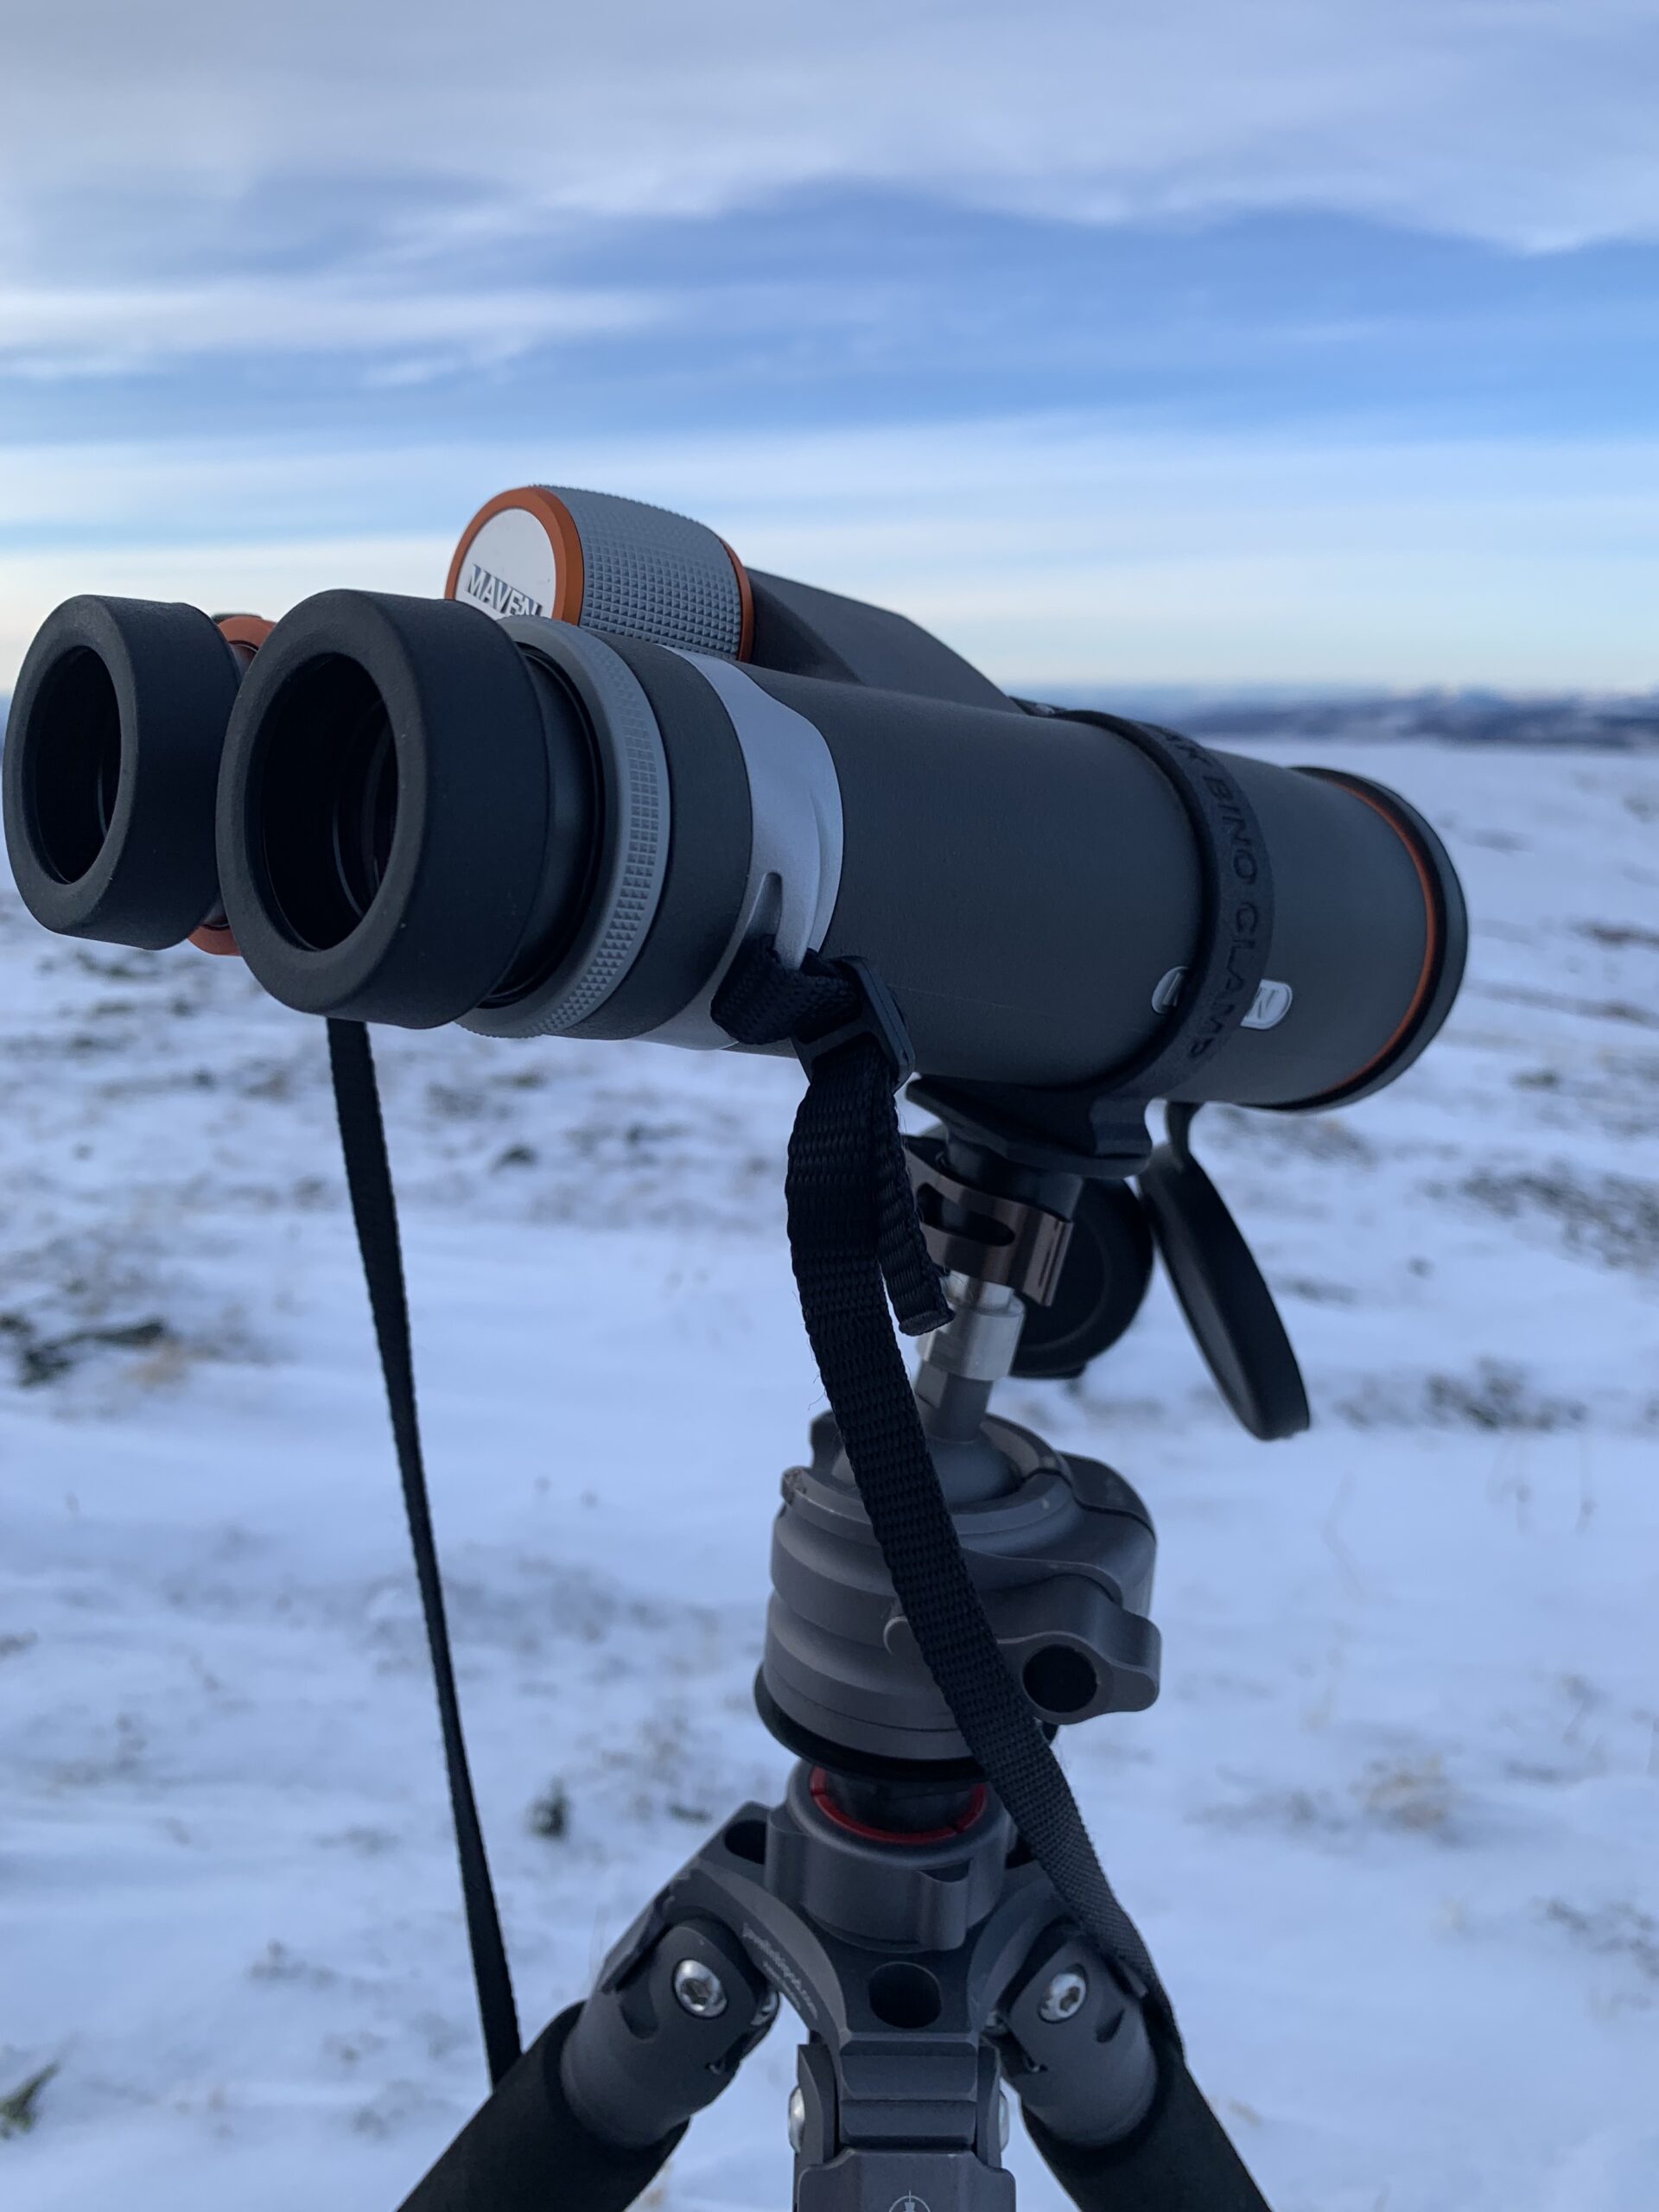 Using the Ascent Tripod for glassing with Binoculars